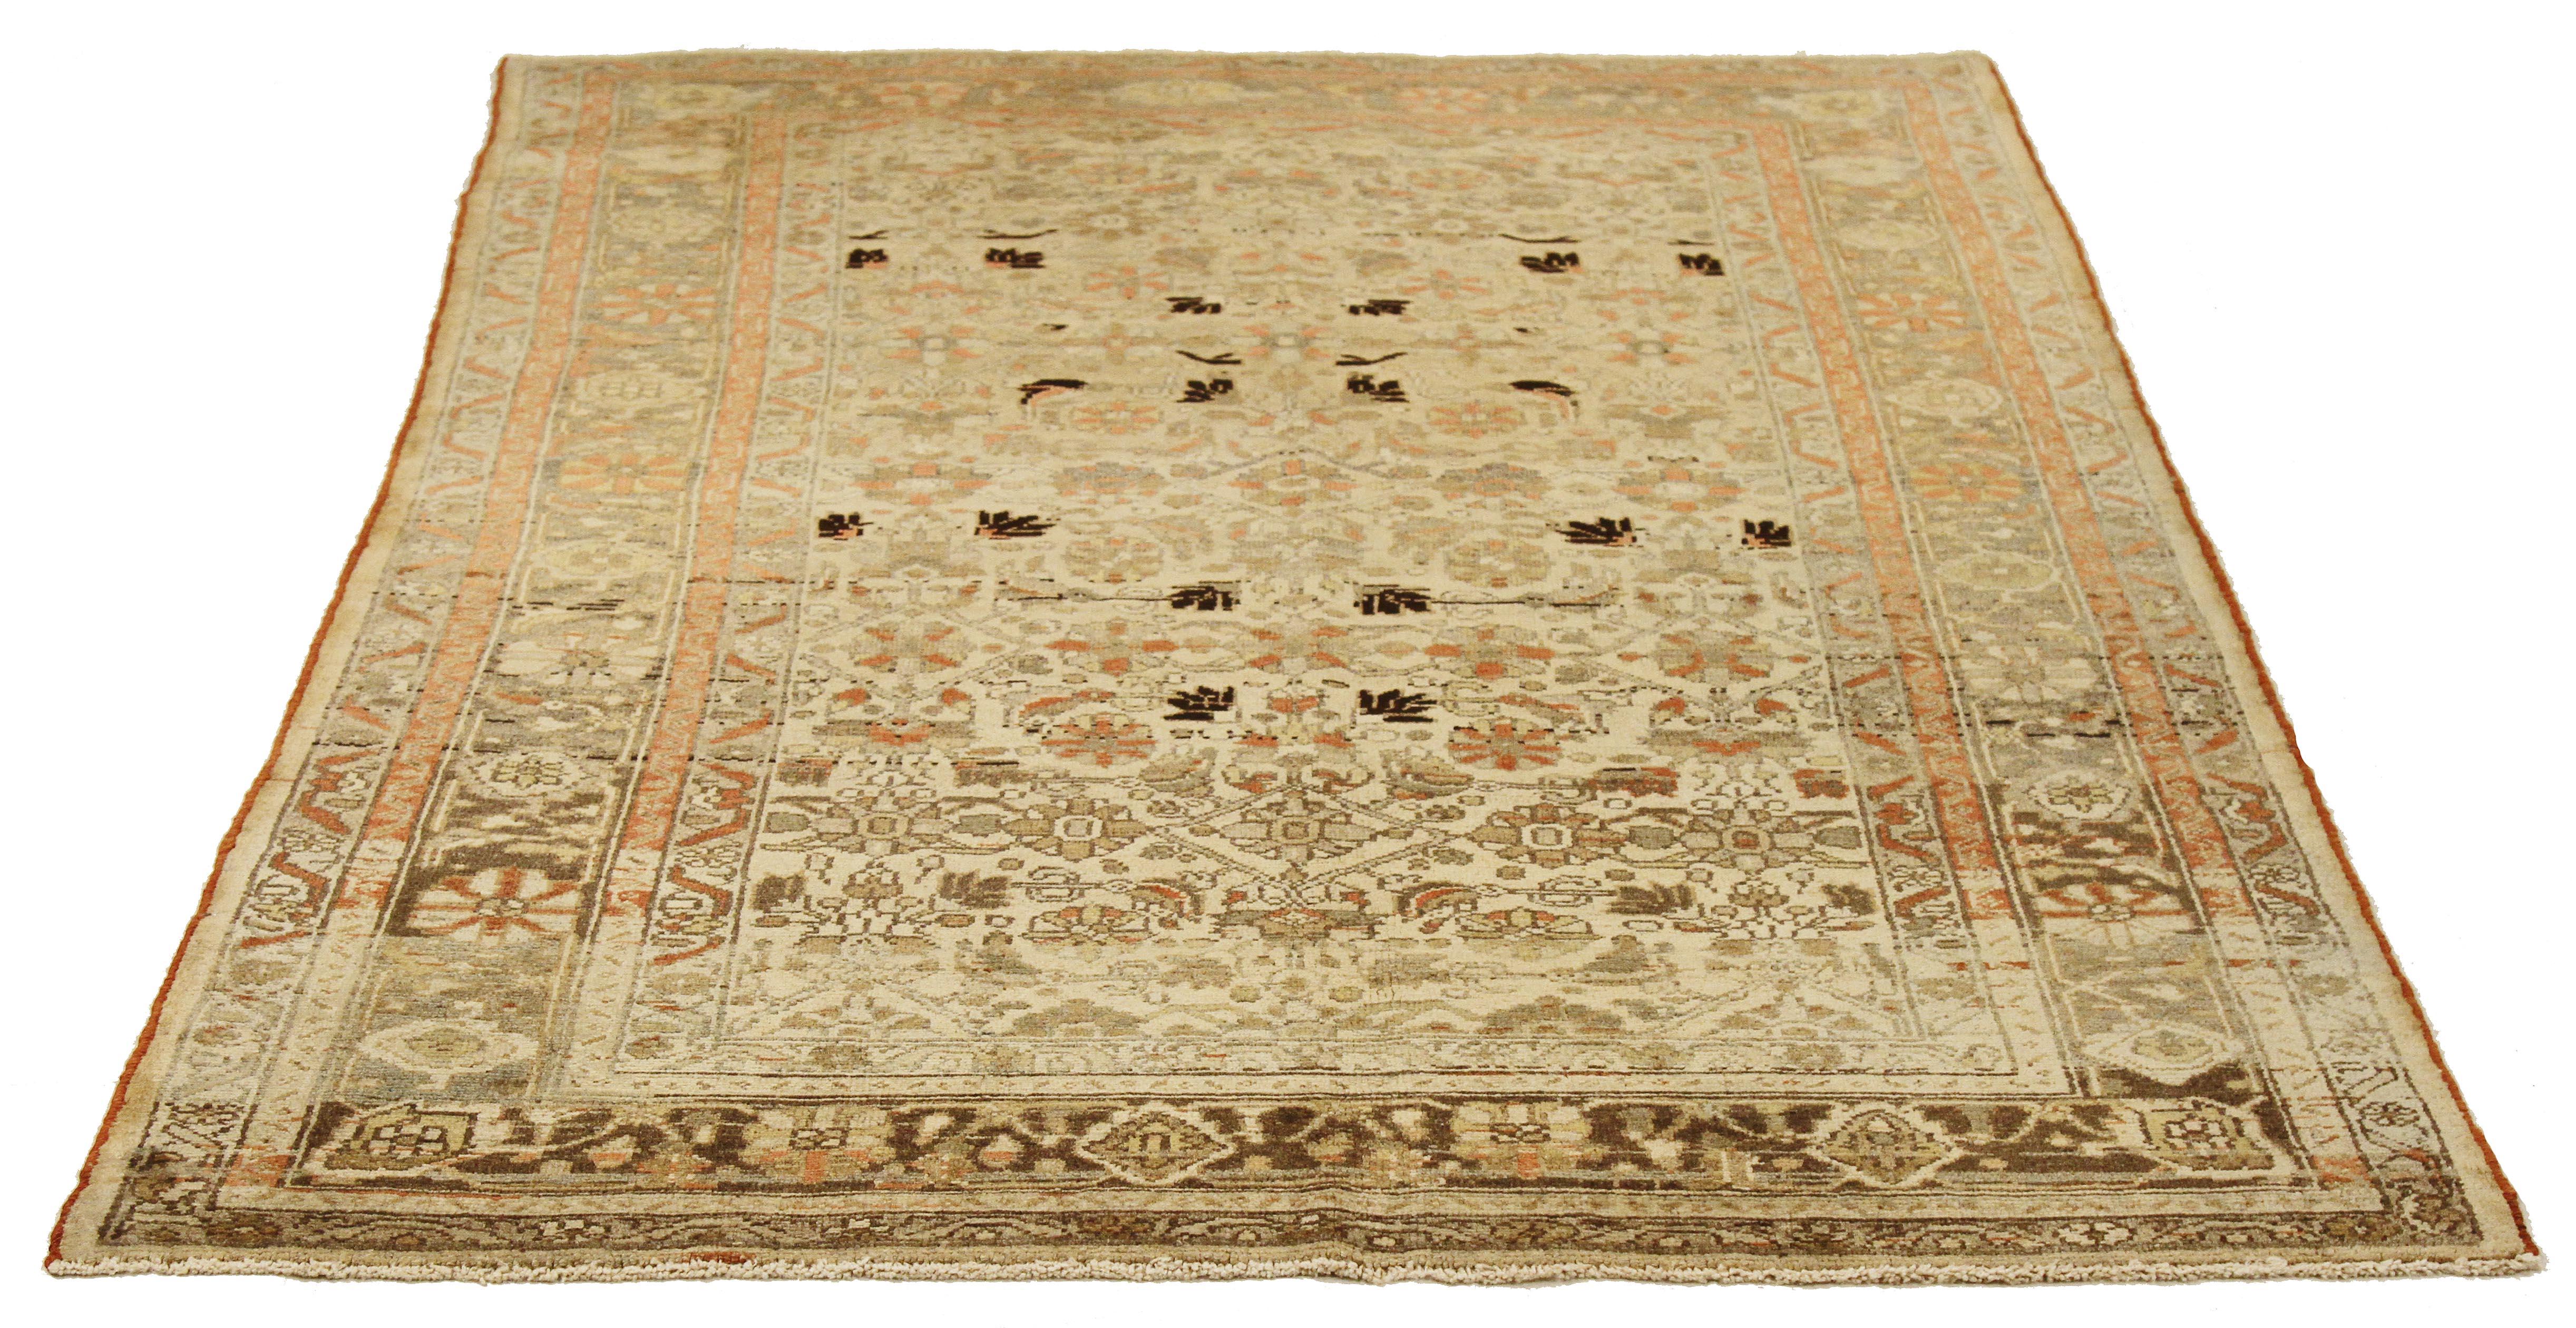 Antique Persian rug handwoven from the finest sheep’s wool and colored with all-natural vegetable dyes that are safe for humans and pets. It’s a traditional Malayer design featuring black and green flower head details all-over the ivory and gray